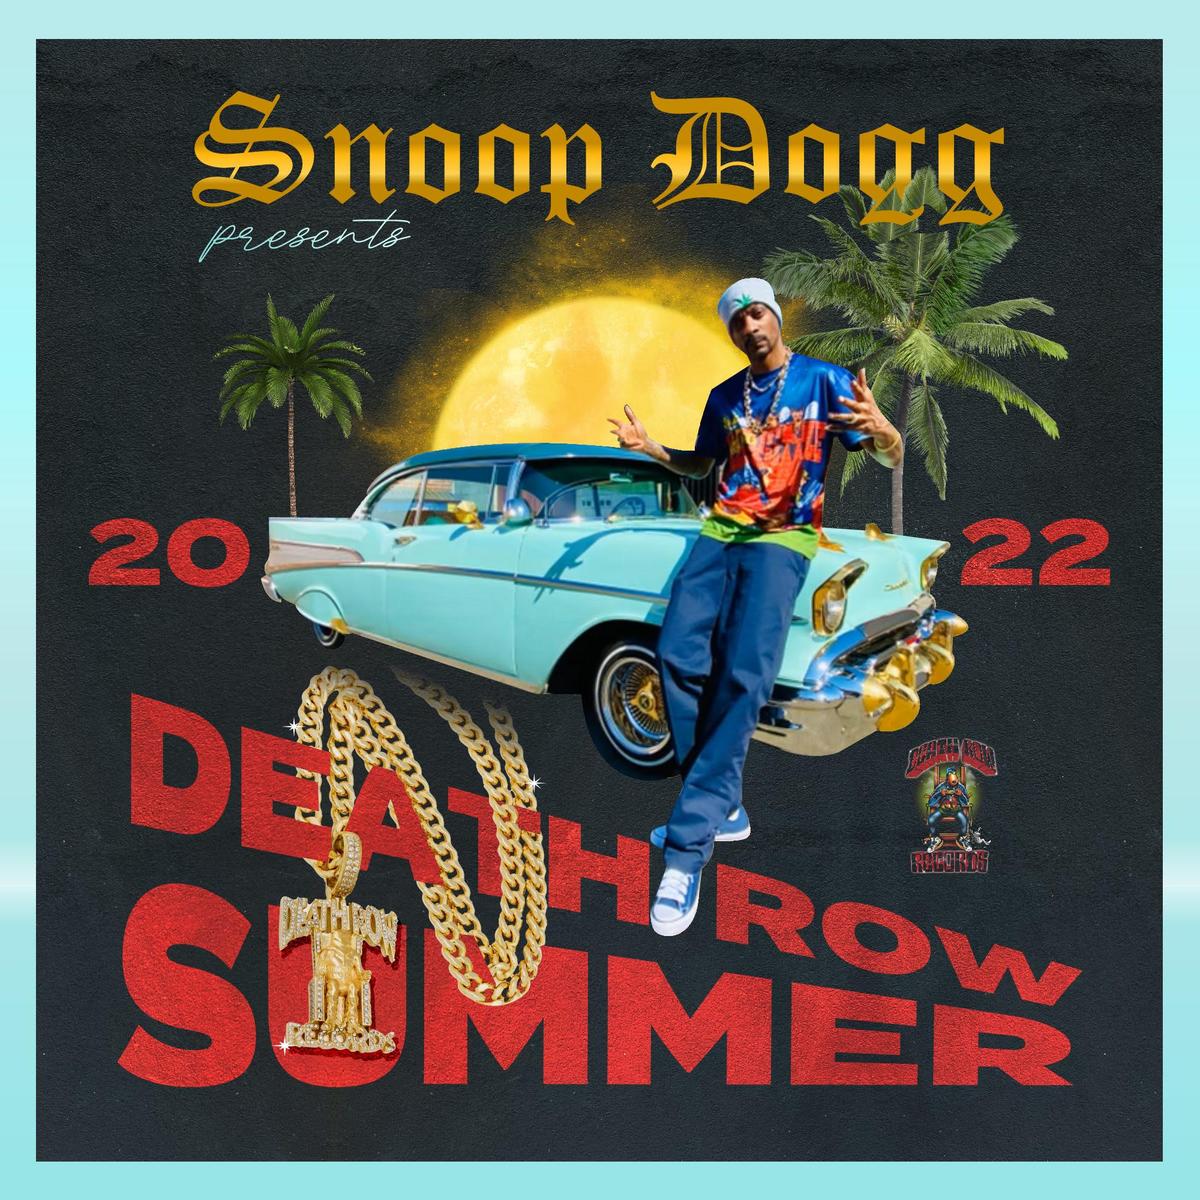 Listen To “Snoop Dogg Presents Death Row Summer 2022” By Snoop Dogg